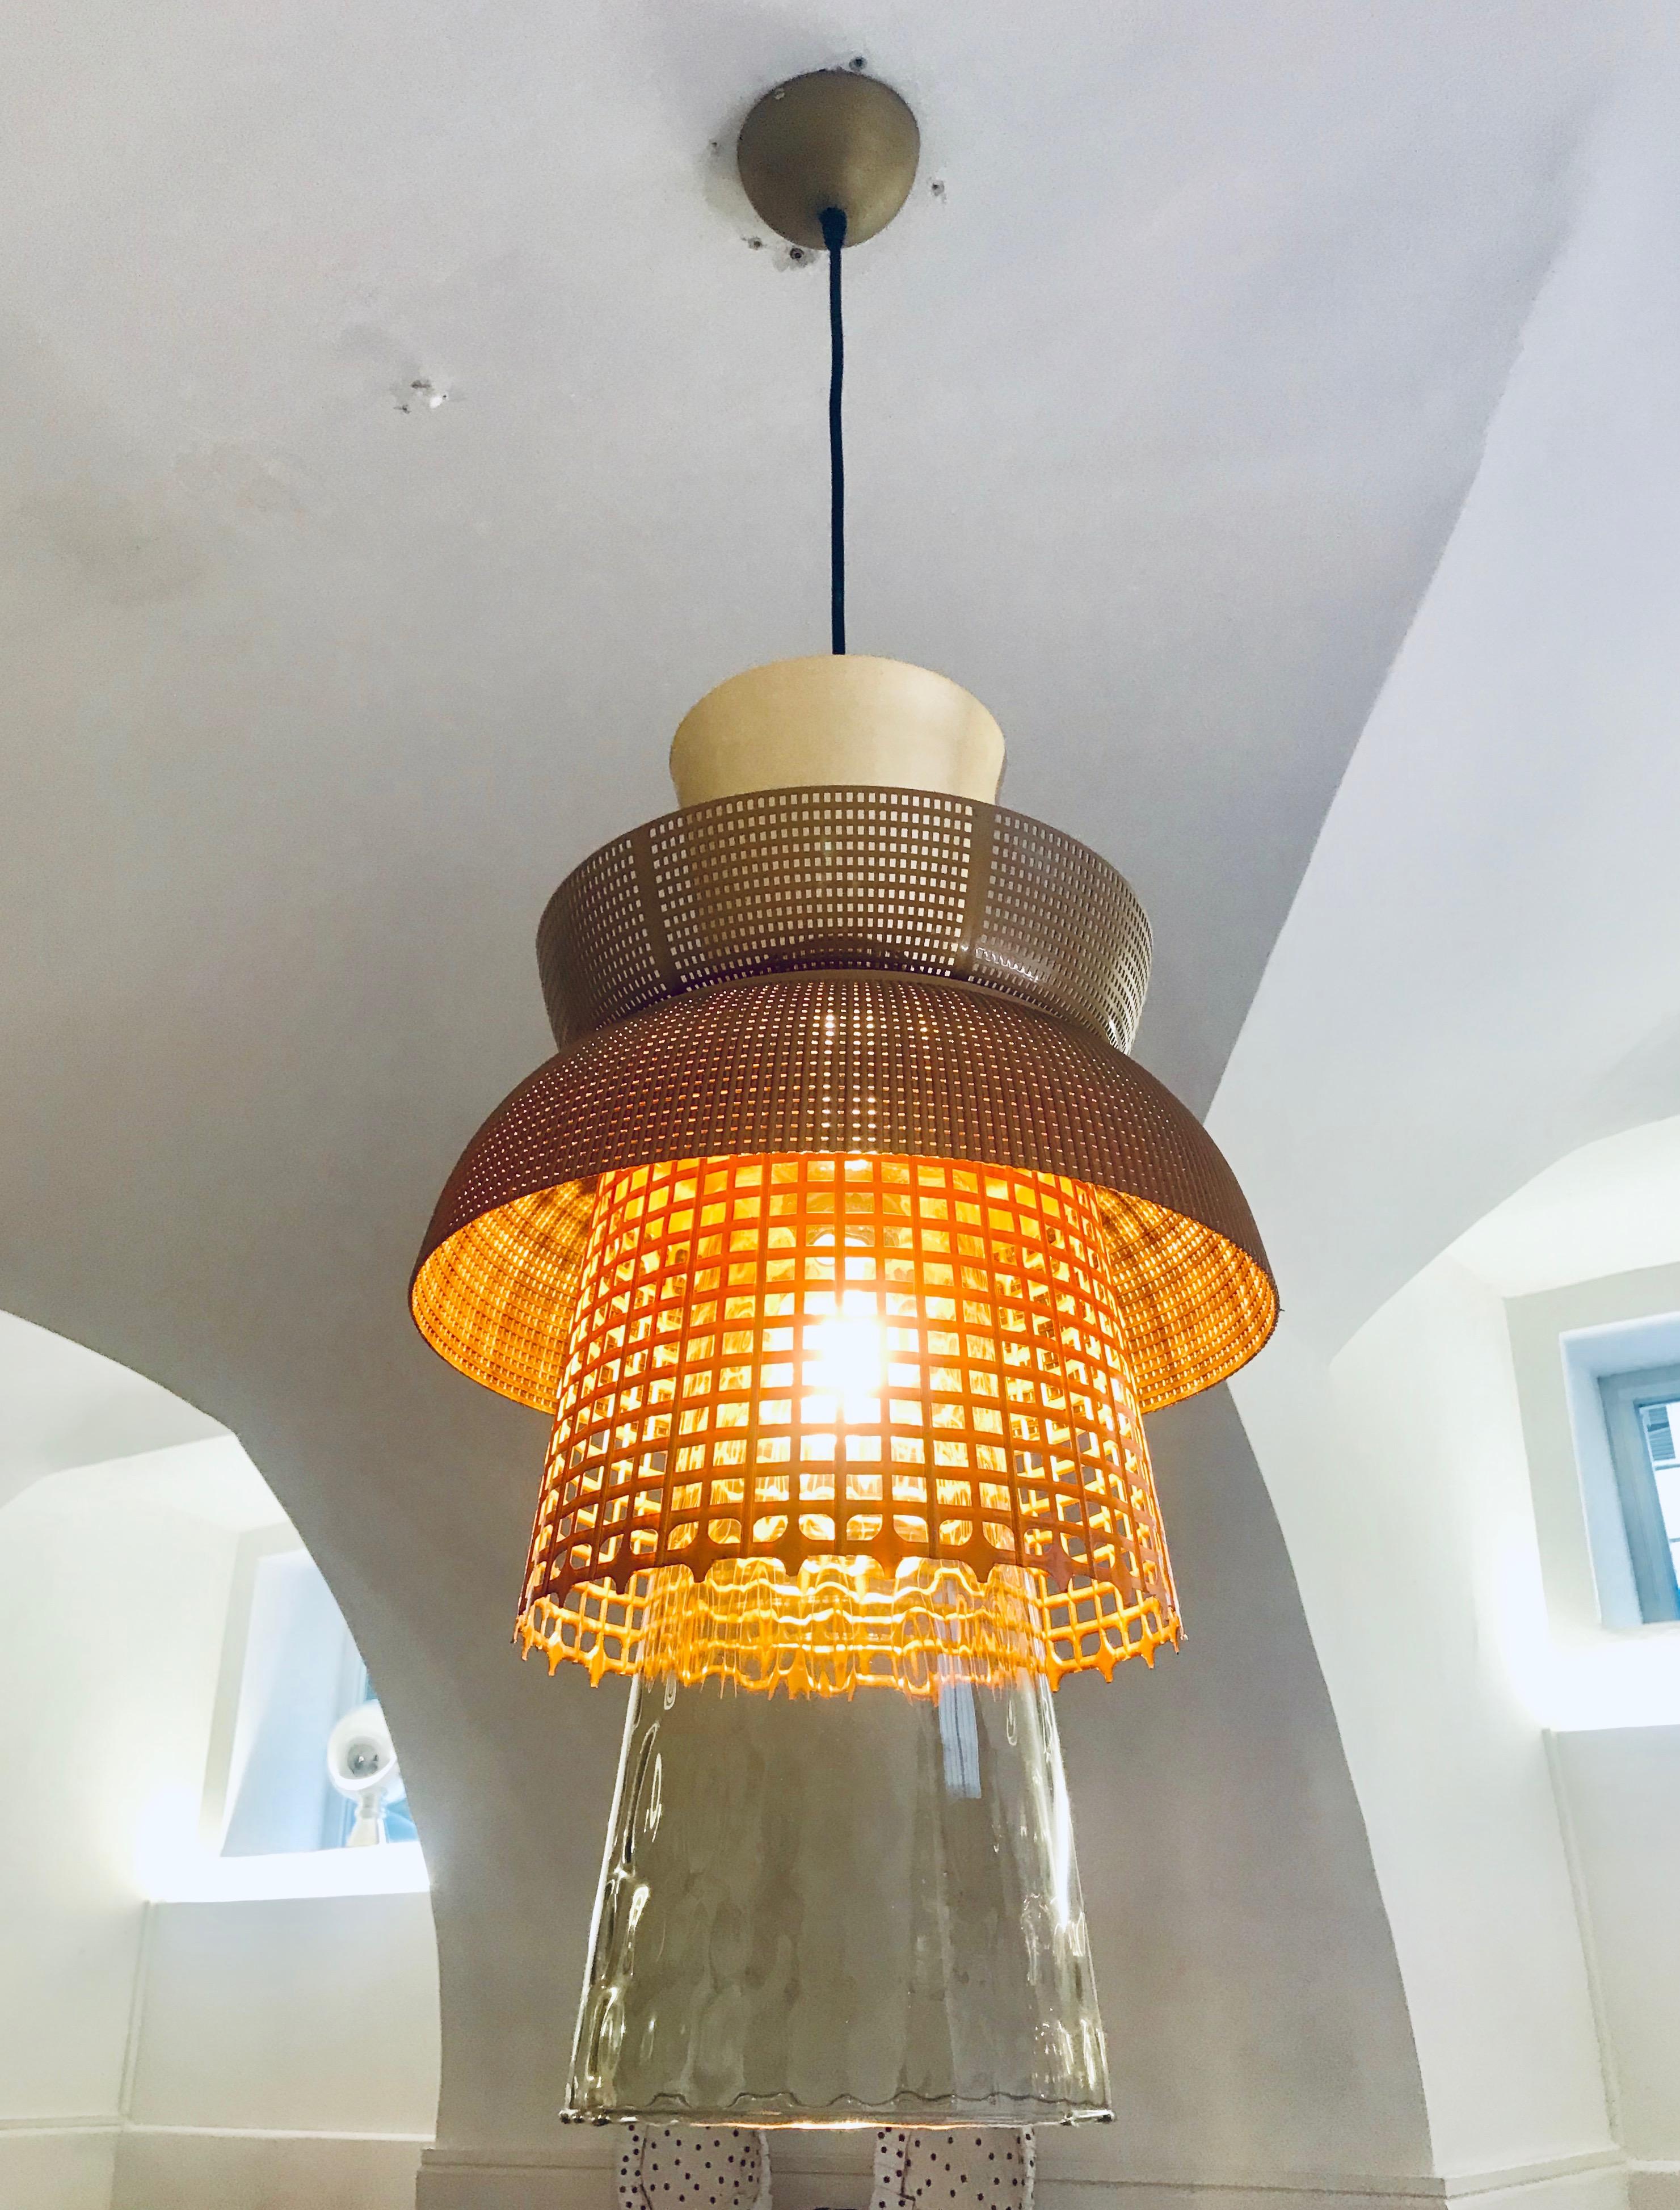 The Bell Lantern is a beautiful luminary piece by Element&Co.

Its organic shape and warm colors serve to add a comforting Ambience to your home or business. 

Its size is not overpowering and is thus suitable for a space of any size - either as